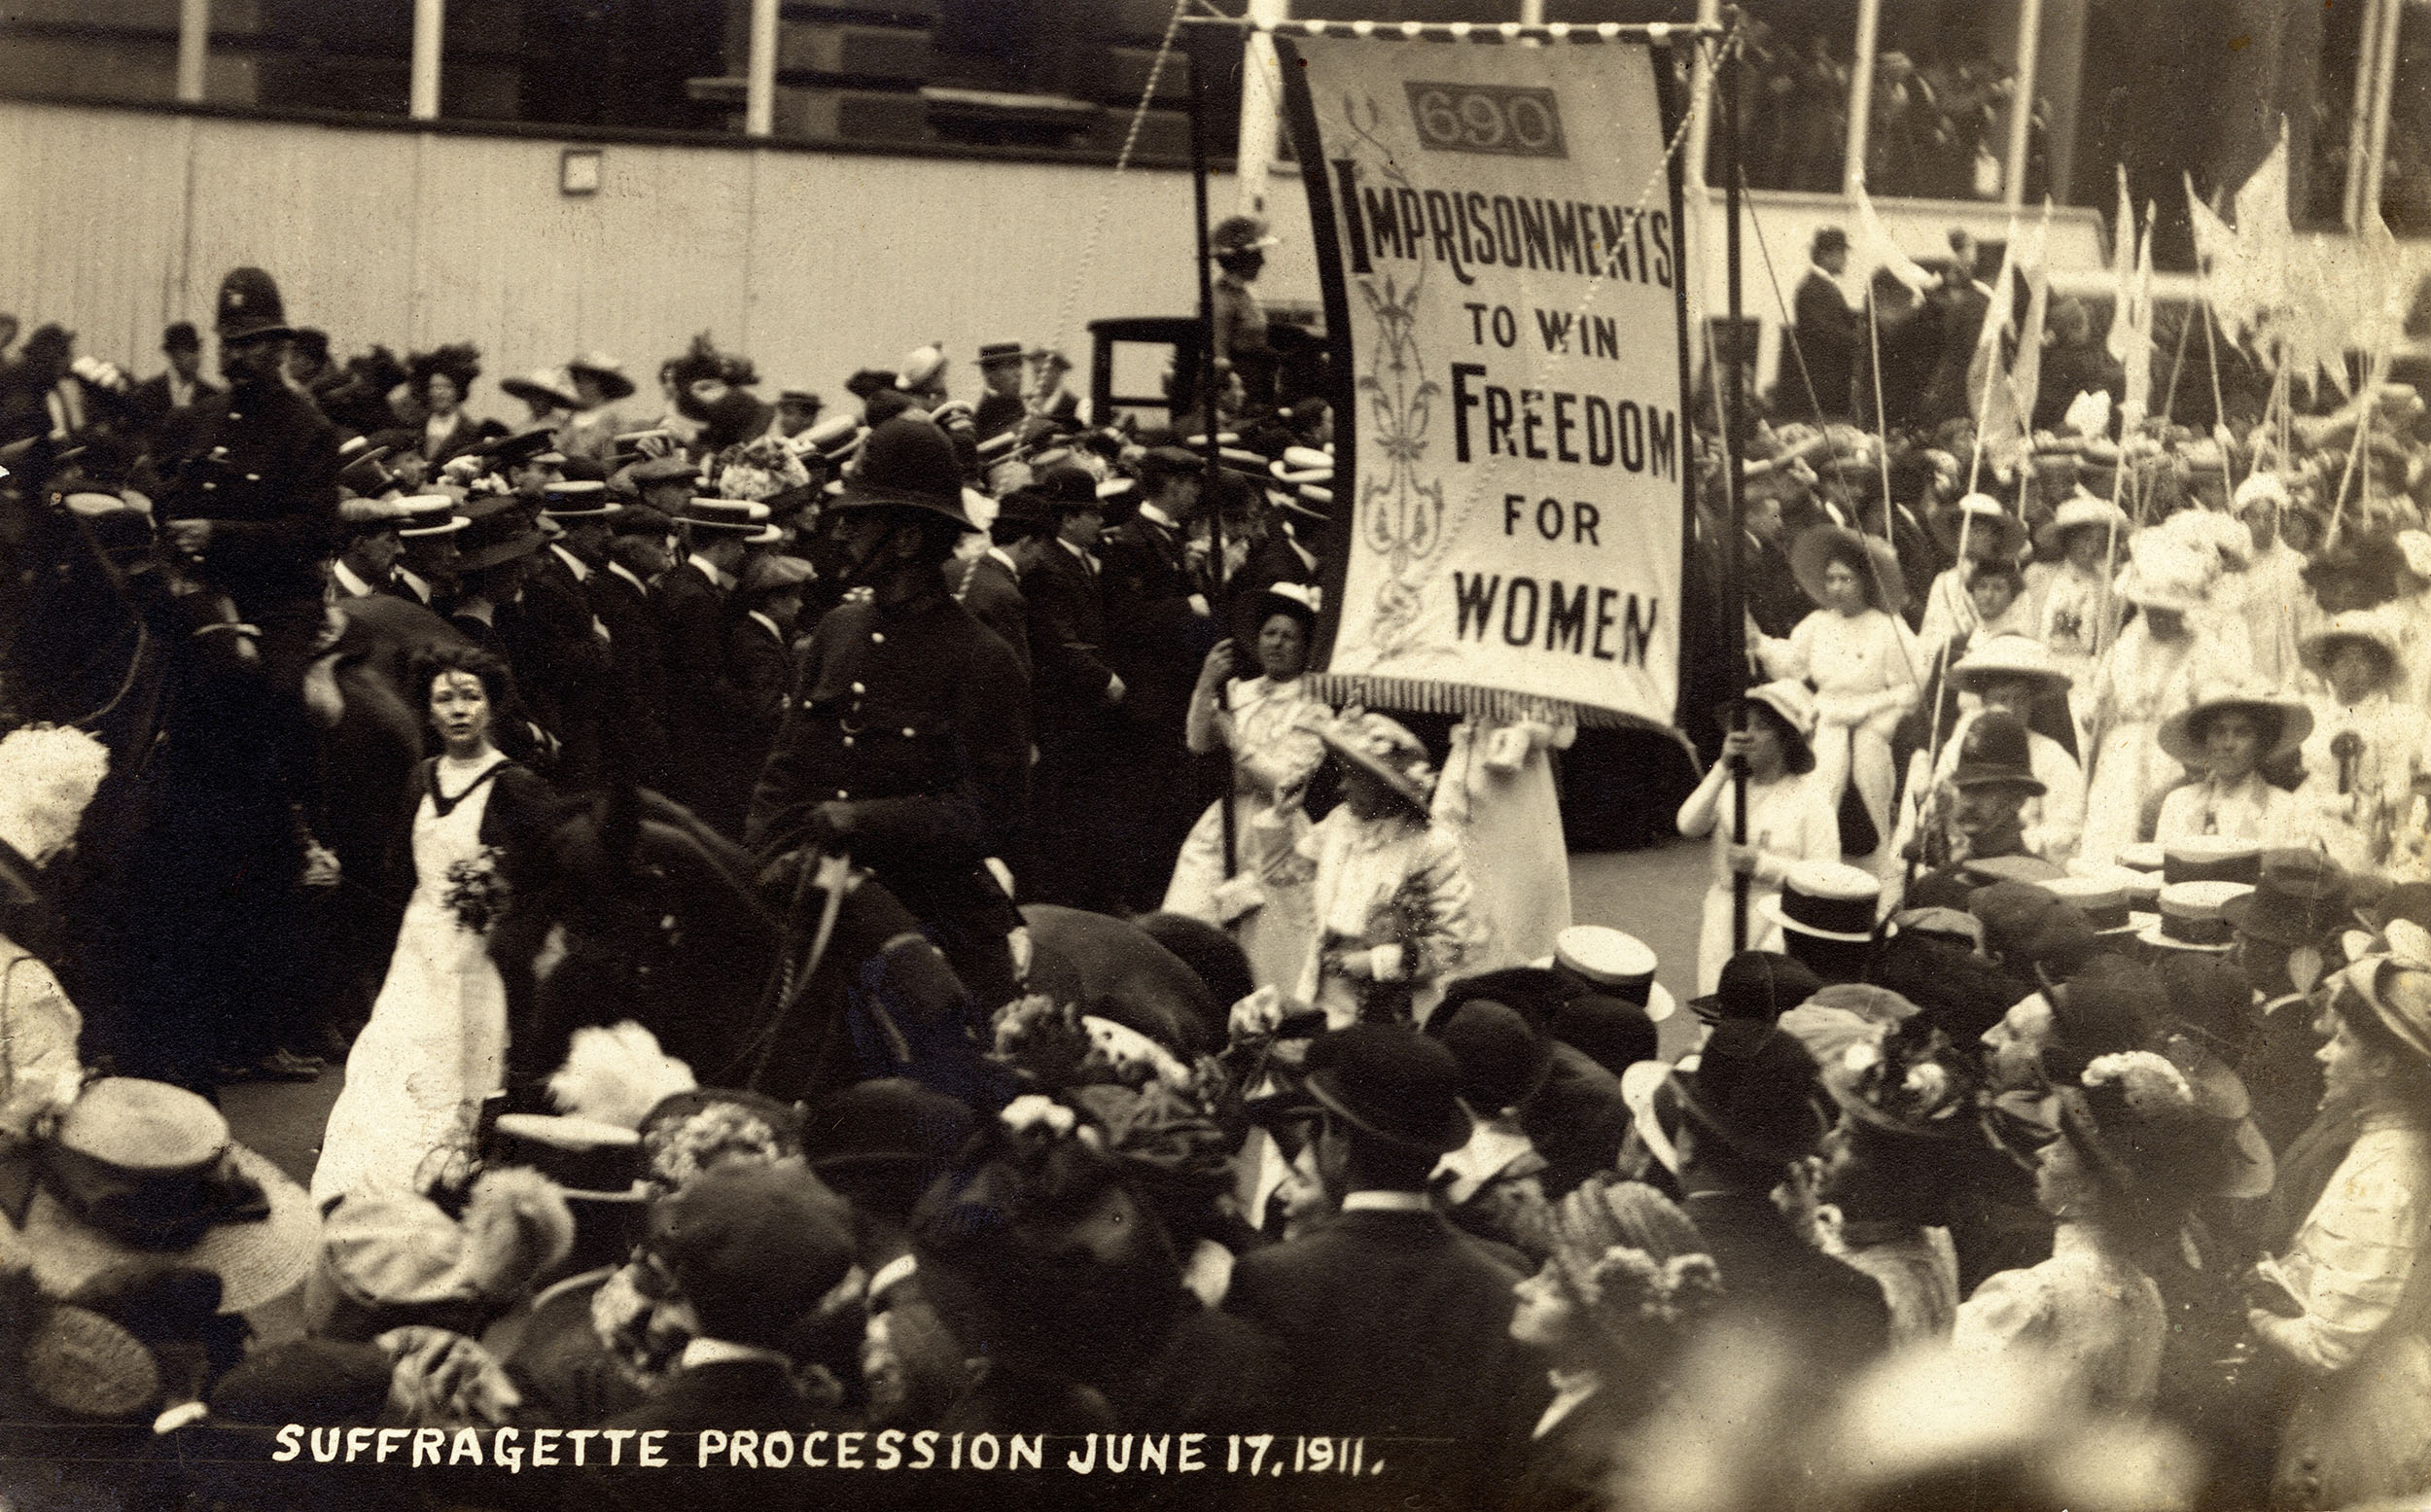 Black and white photo of suffragette procession 1911. Banner text reads: 690 imprisonments to win freedom for women